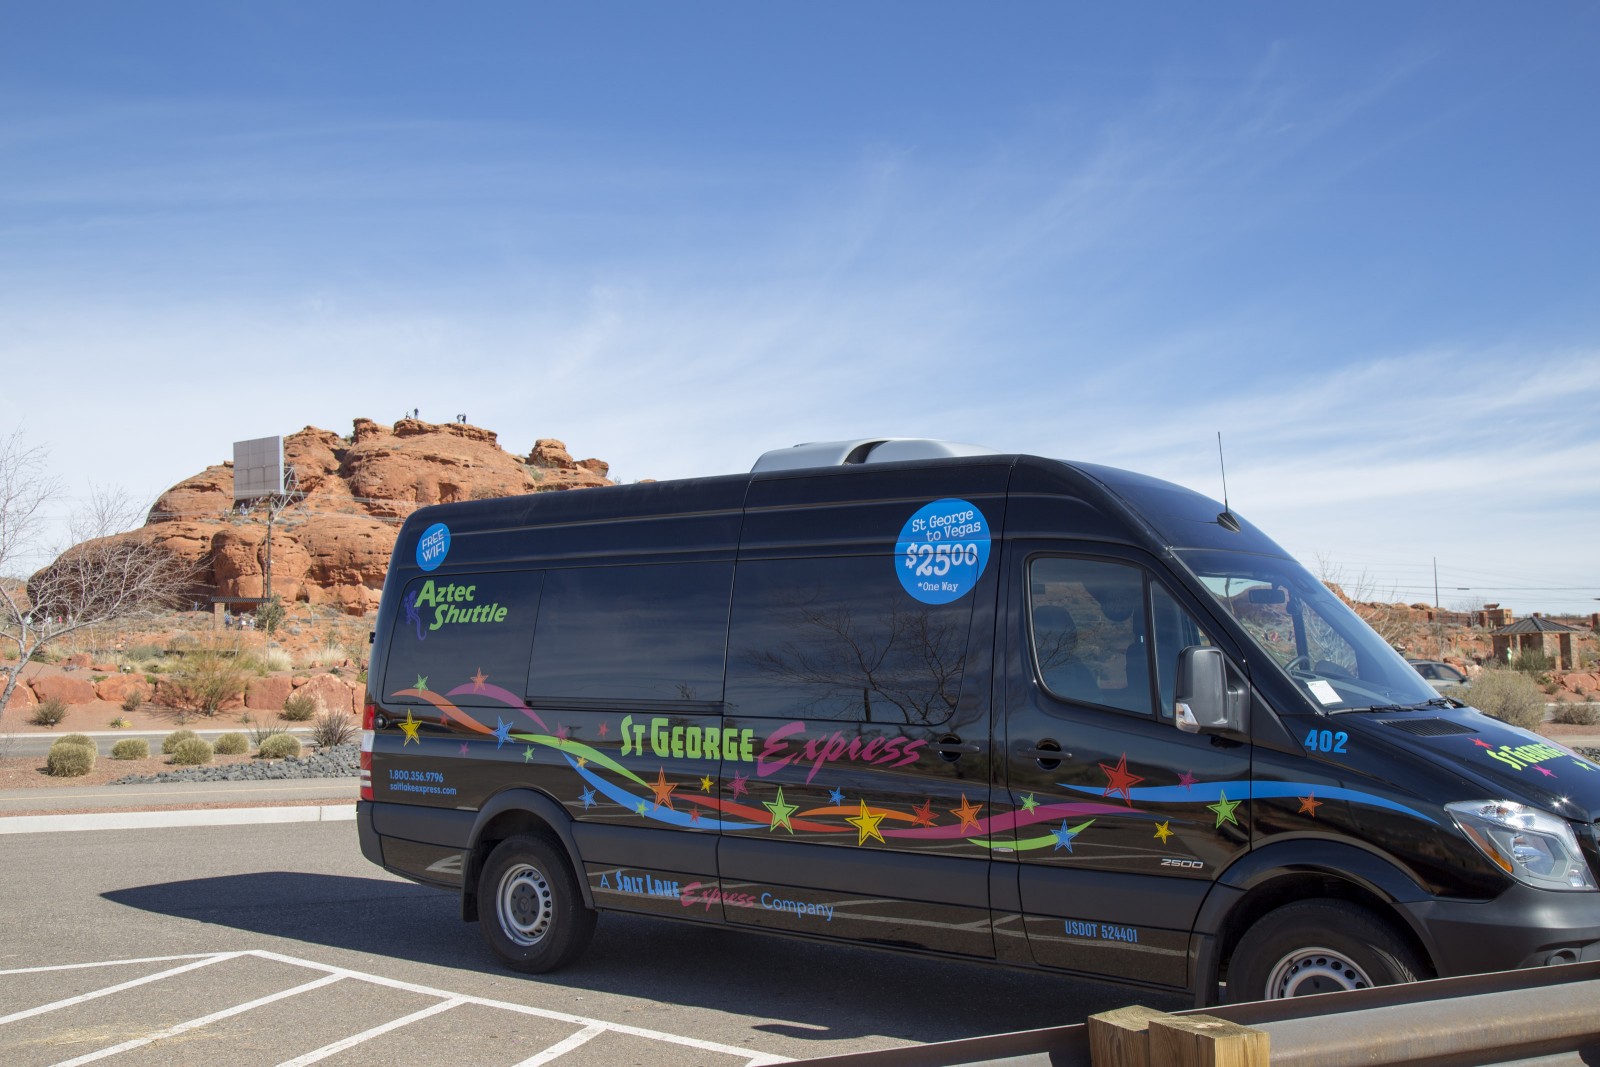 St George Express is helping you elevate your bus travel experience